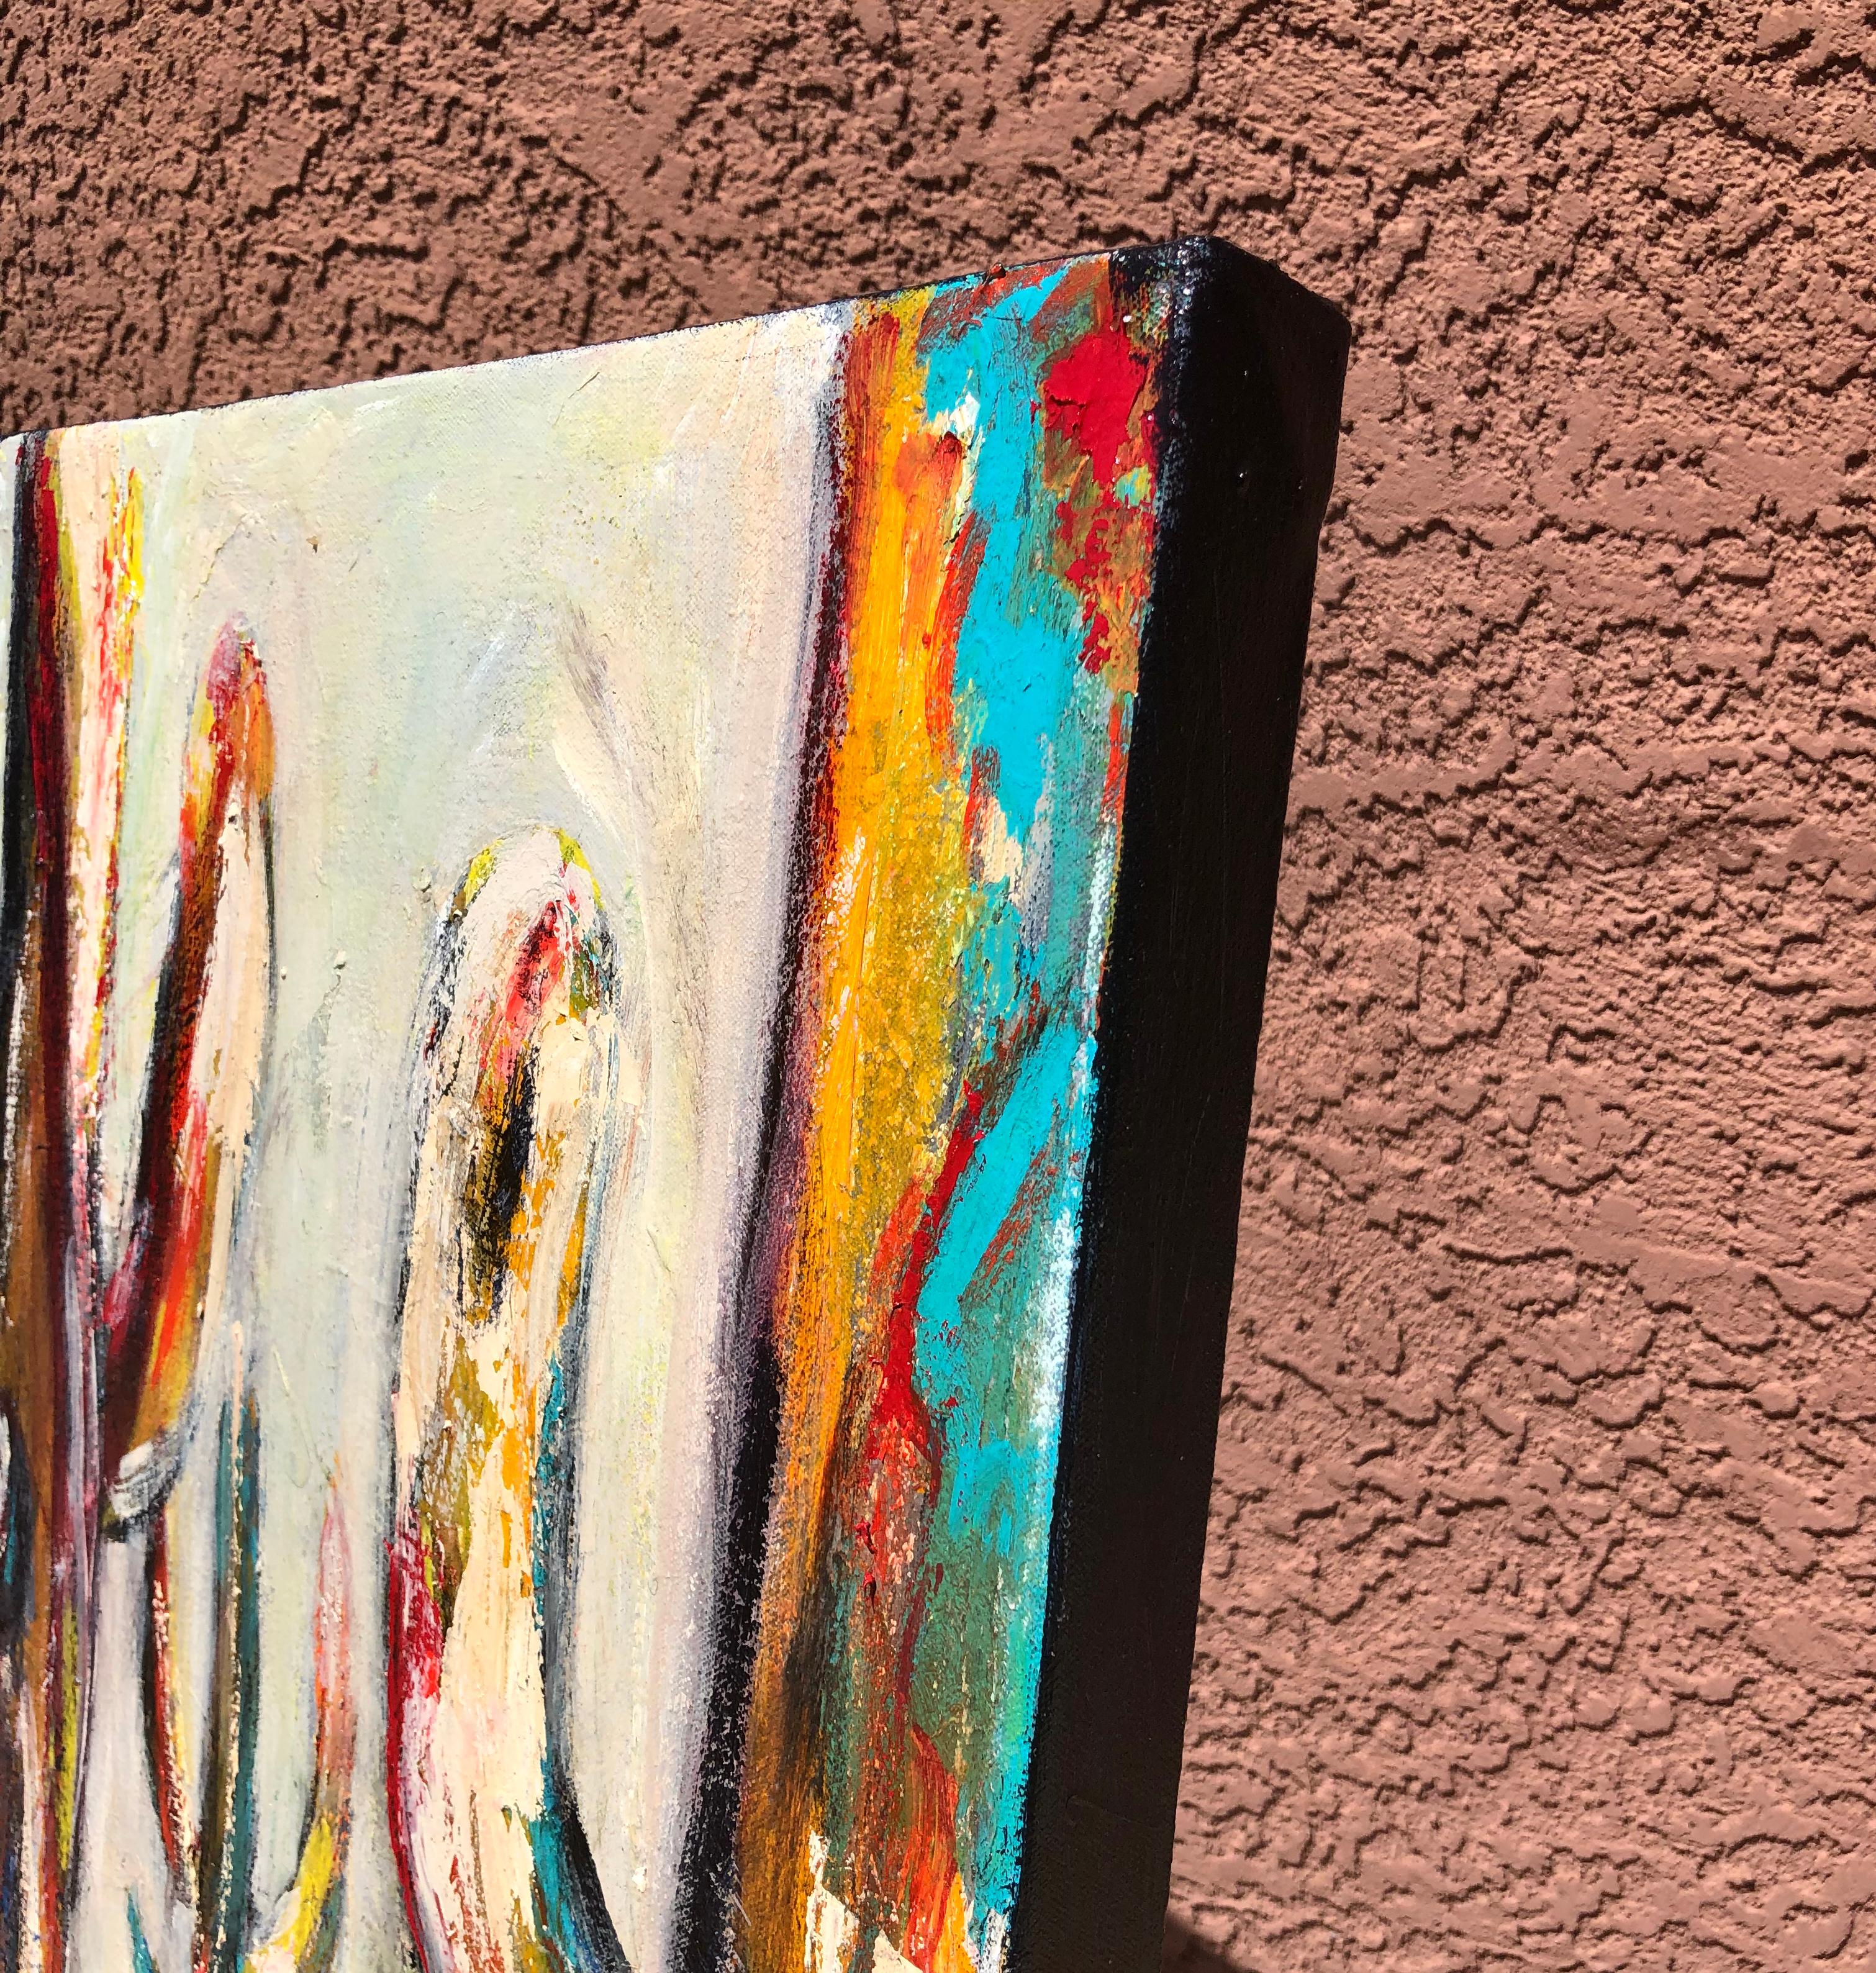 <p>Artist Comments<br>Artist Sharon Sieben shares an expressionist rendering of cacti. The last rays of sun glimmer across the Sonoran Desert. Majestic dust covers the Saguaro's arms, giving them a surreal glow. Sharon passionately paints with bold